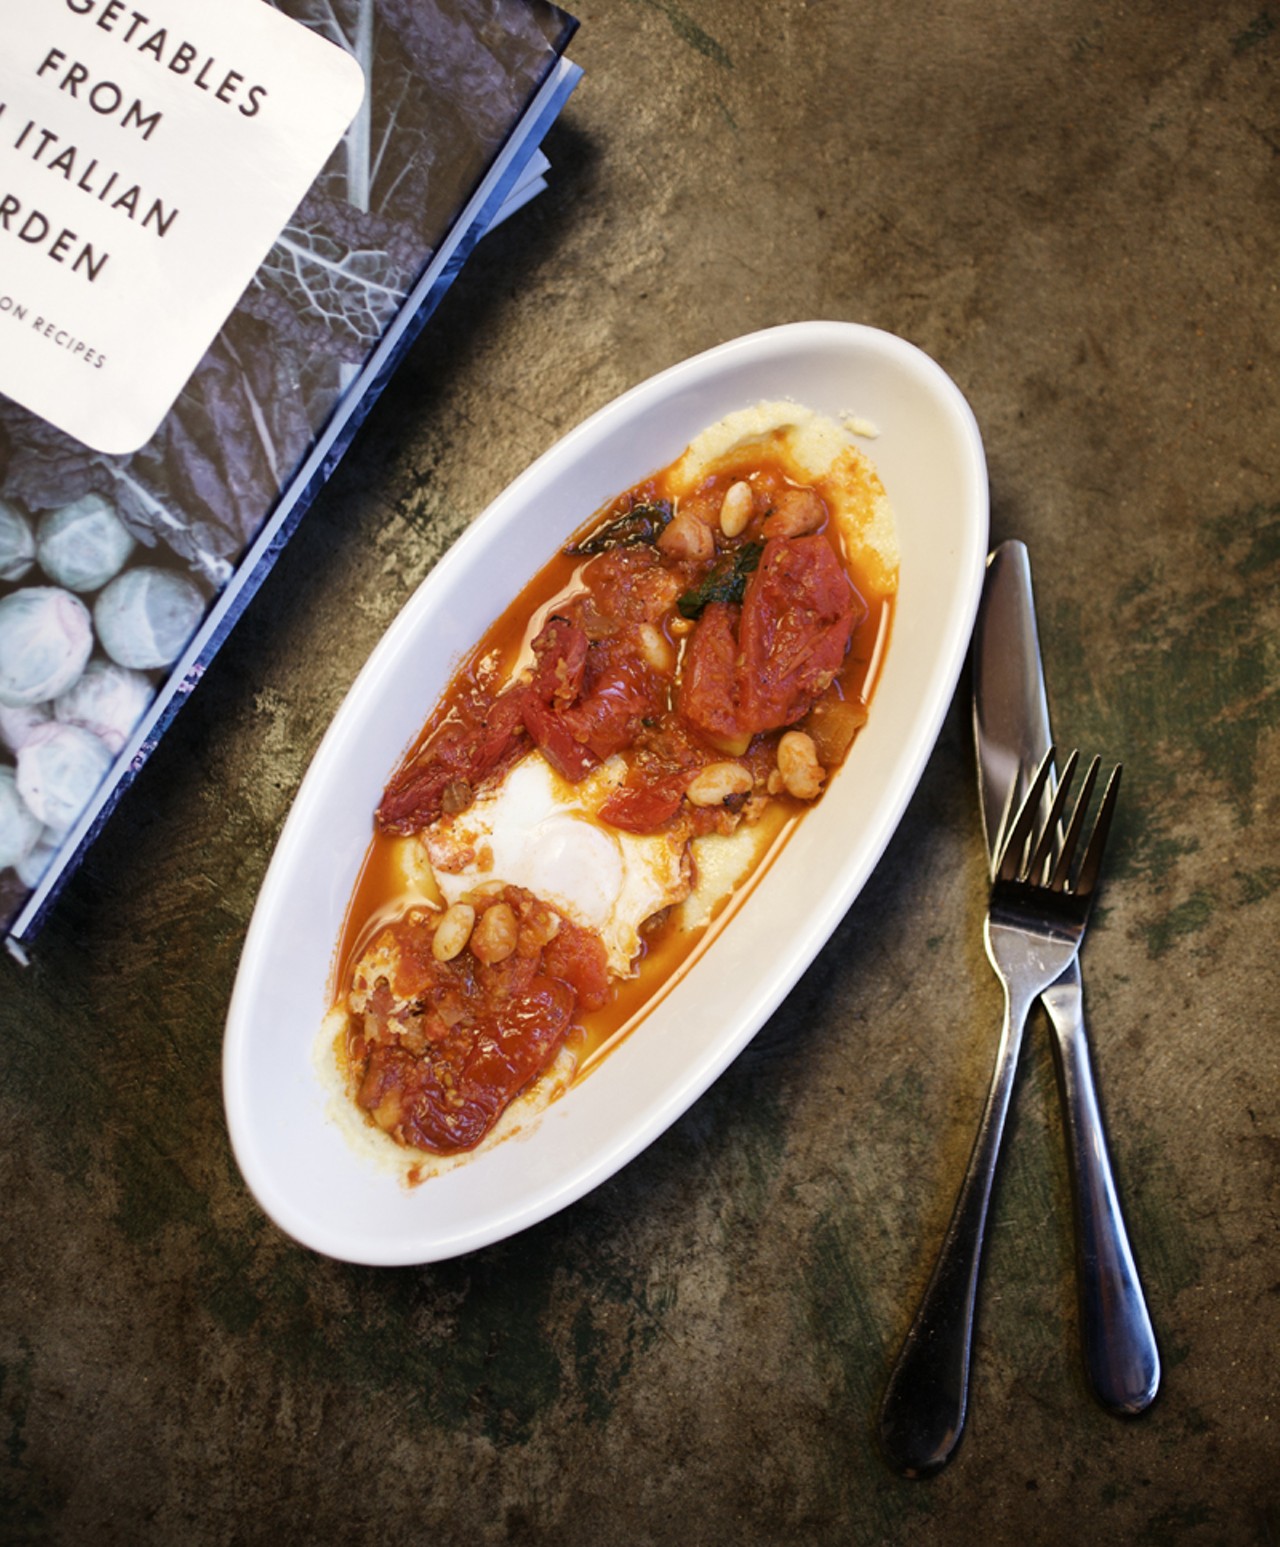 From the Antipasti menu, Hunter's Egg. It is served with beans, pancetta and polenta.